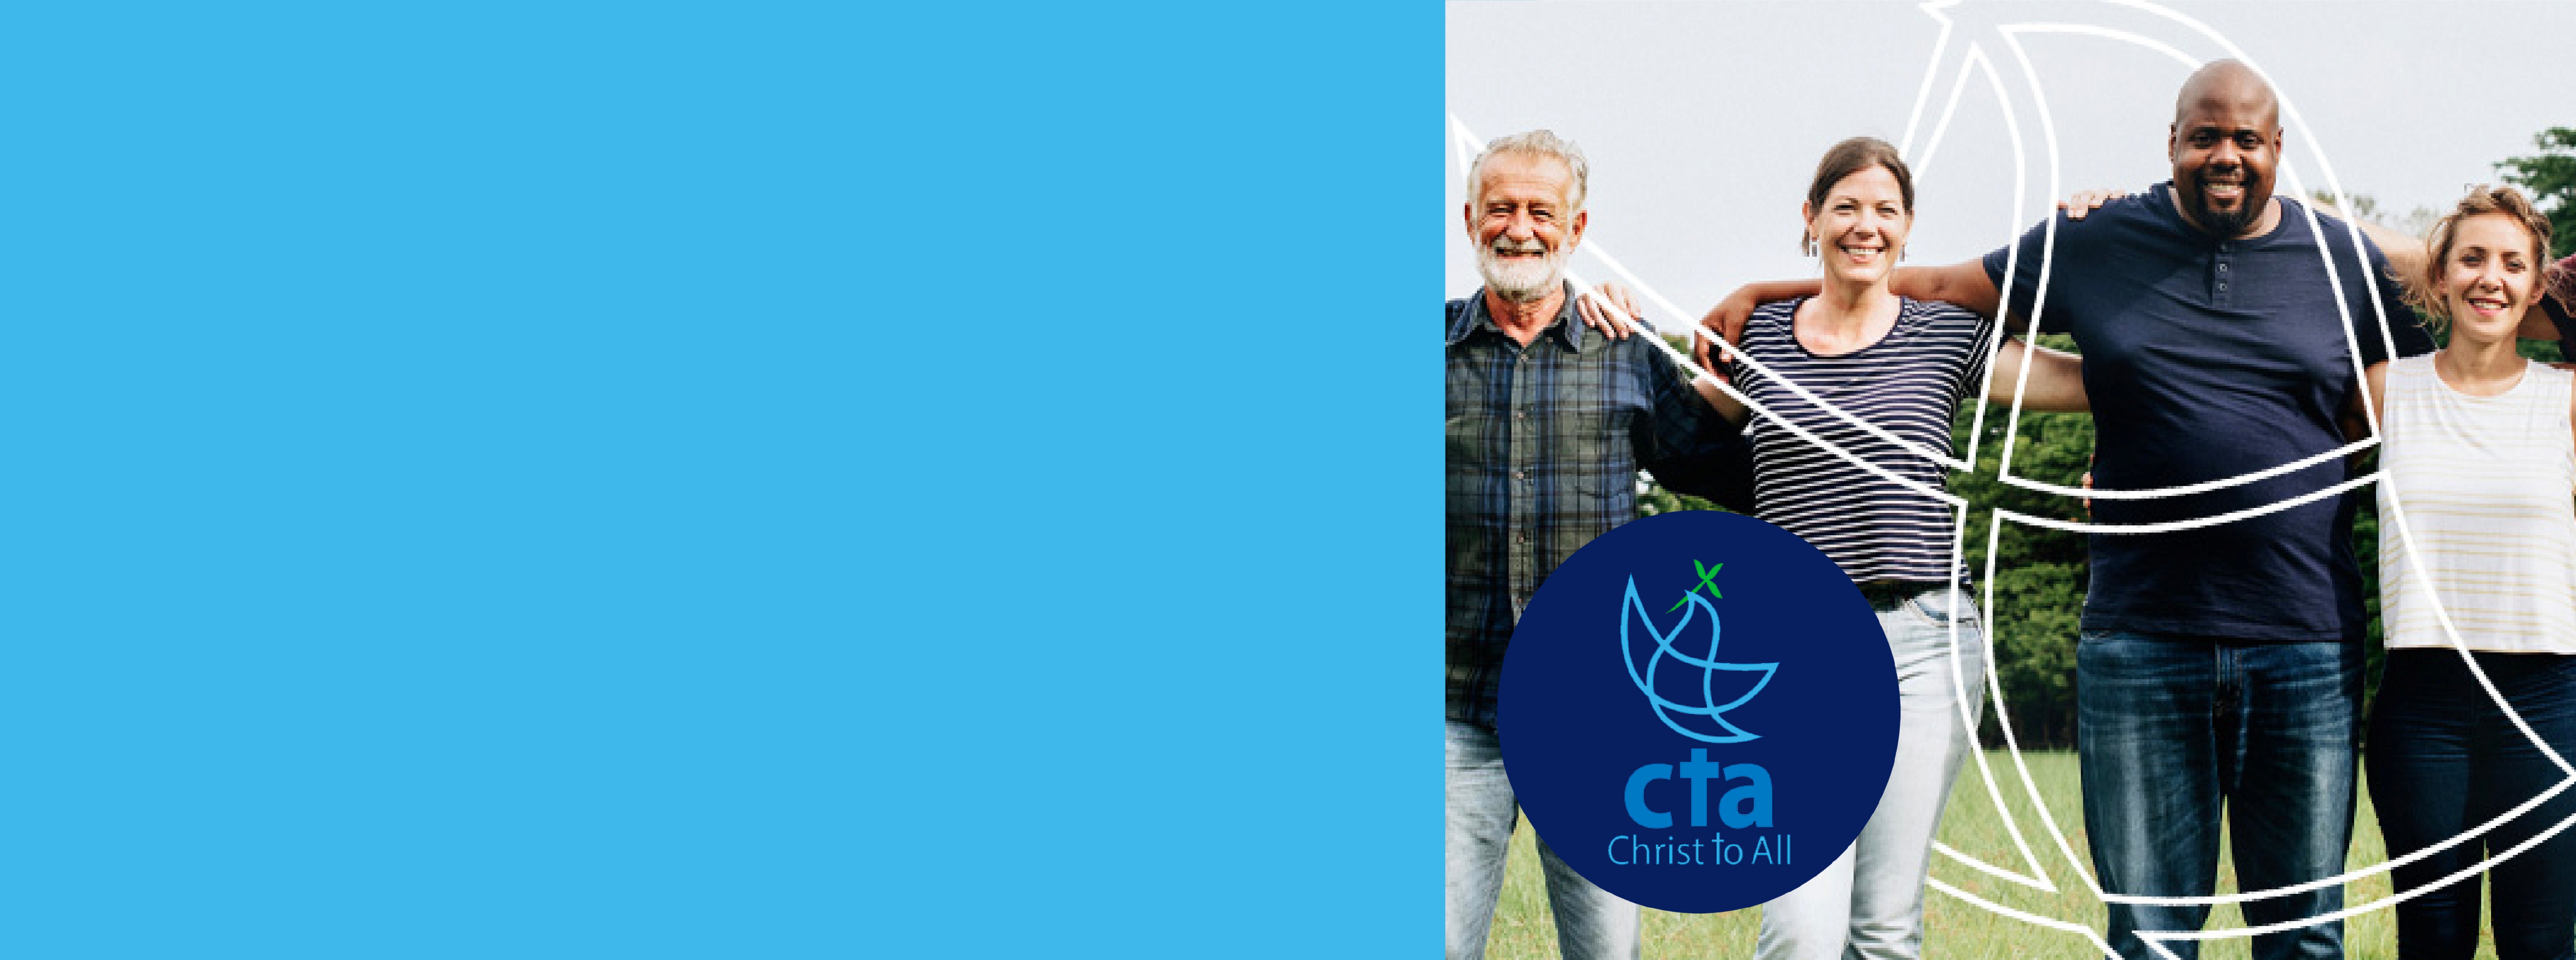 Four people wrapping arms around each other with a banner for CTA, Inc Mighty Networks Community